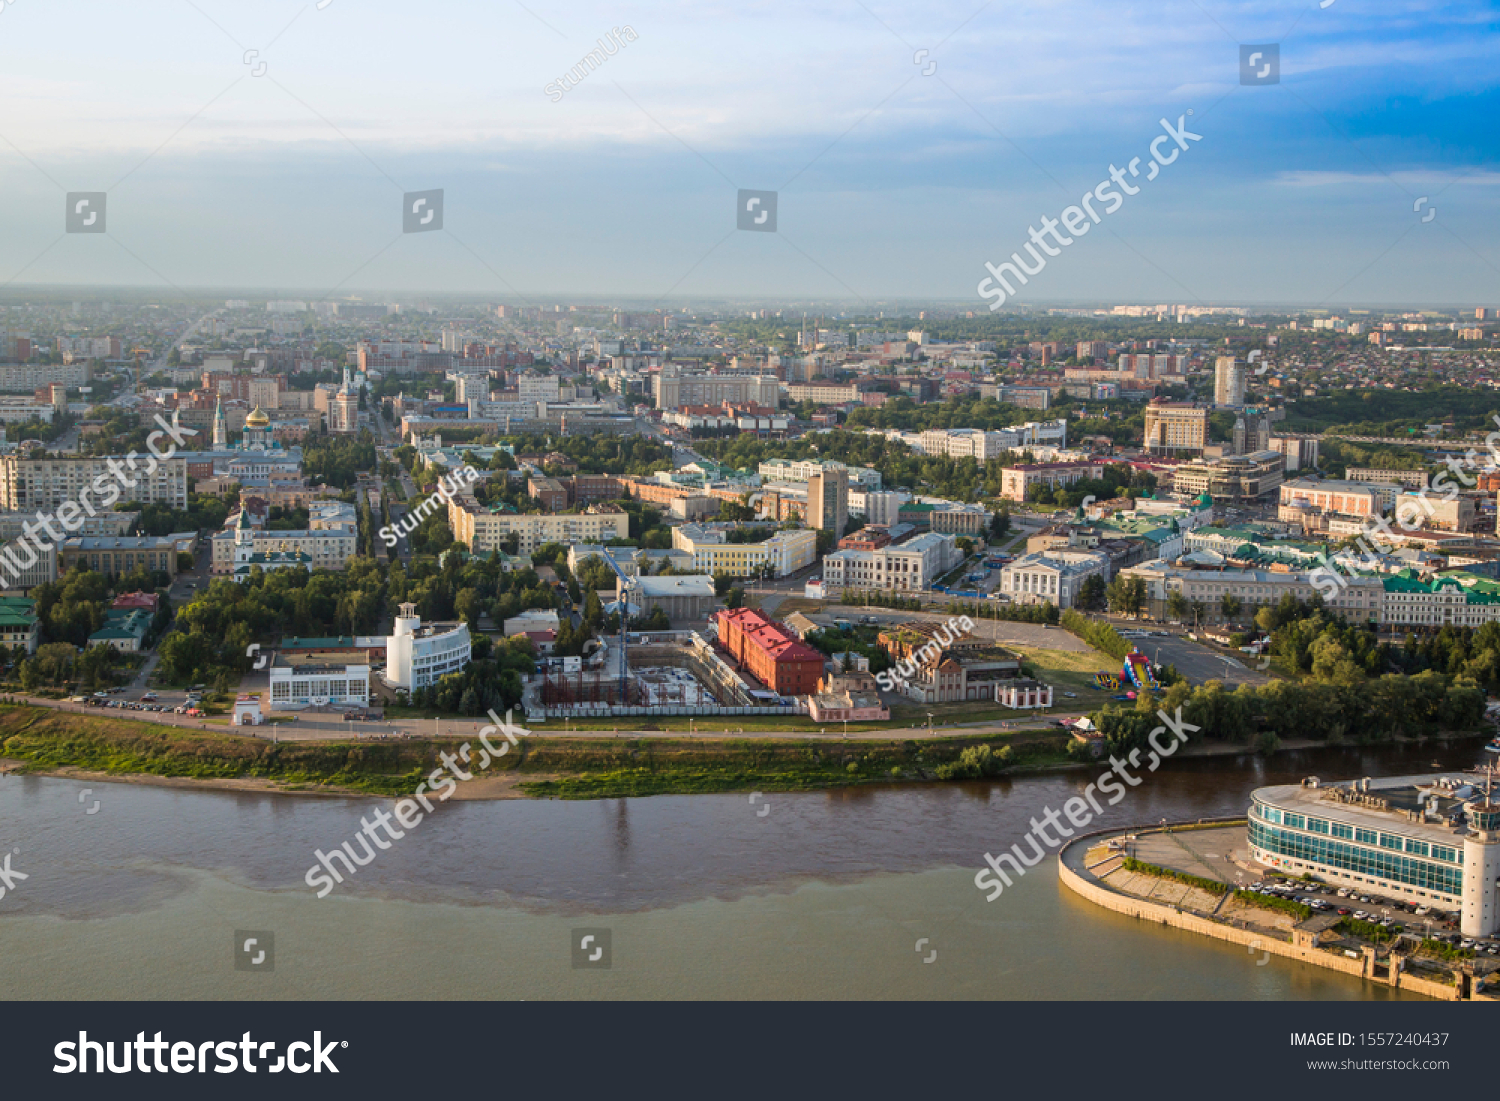 Russia, Omsk, view from the Irtysh river, from a height of 100 meters, 2019.07.19 #1557240437